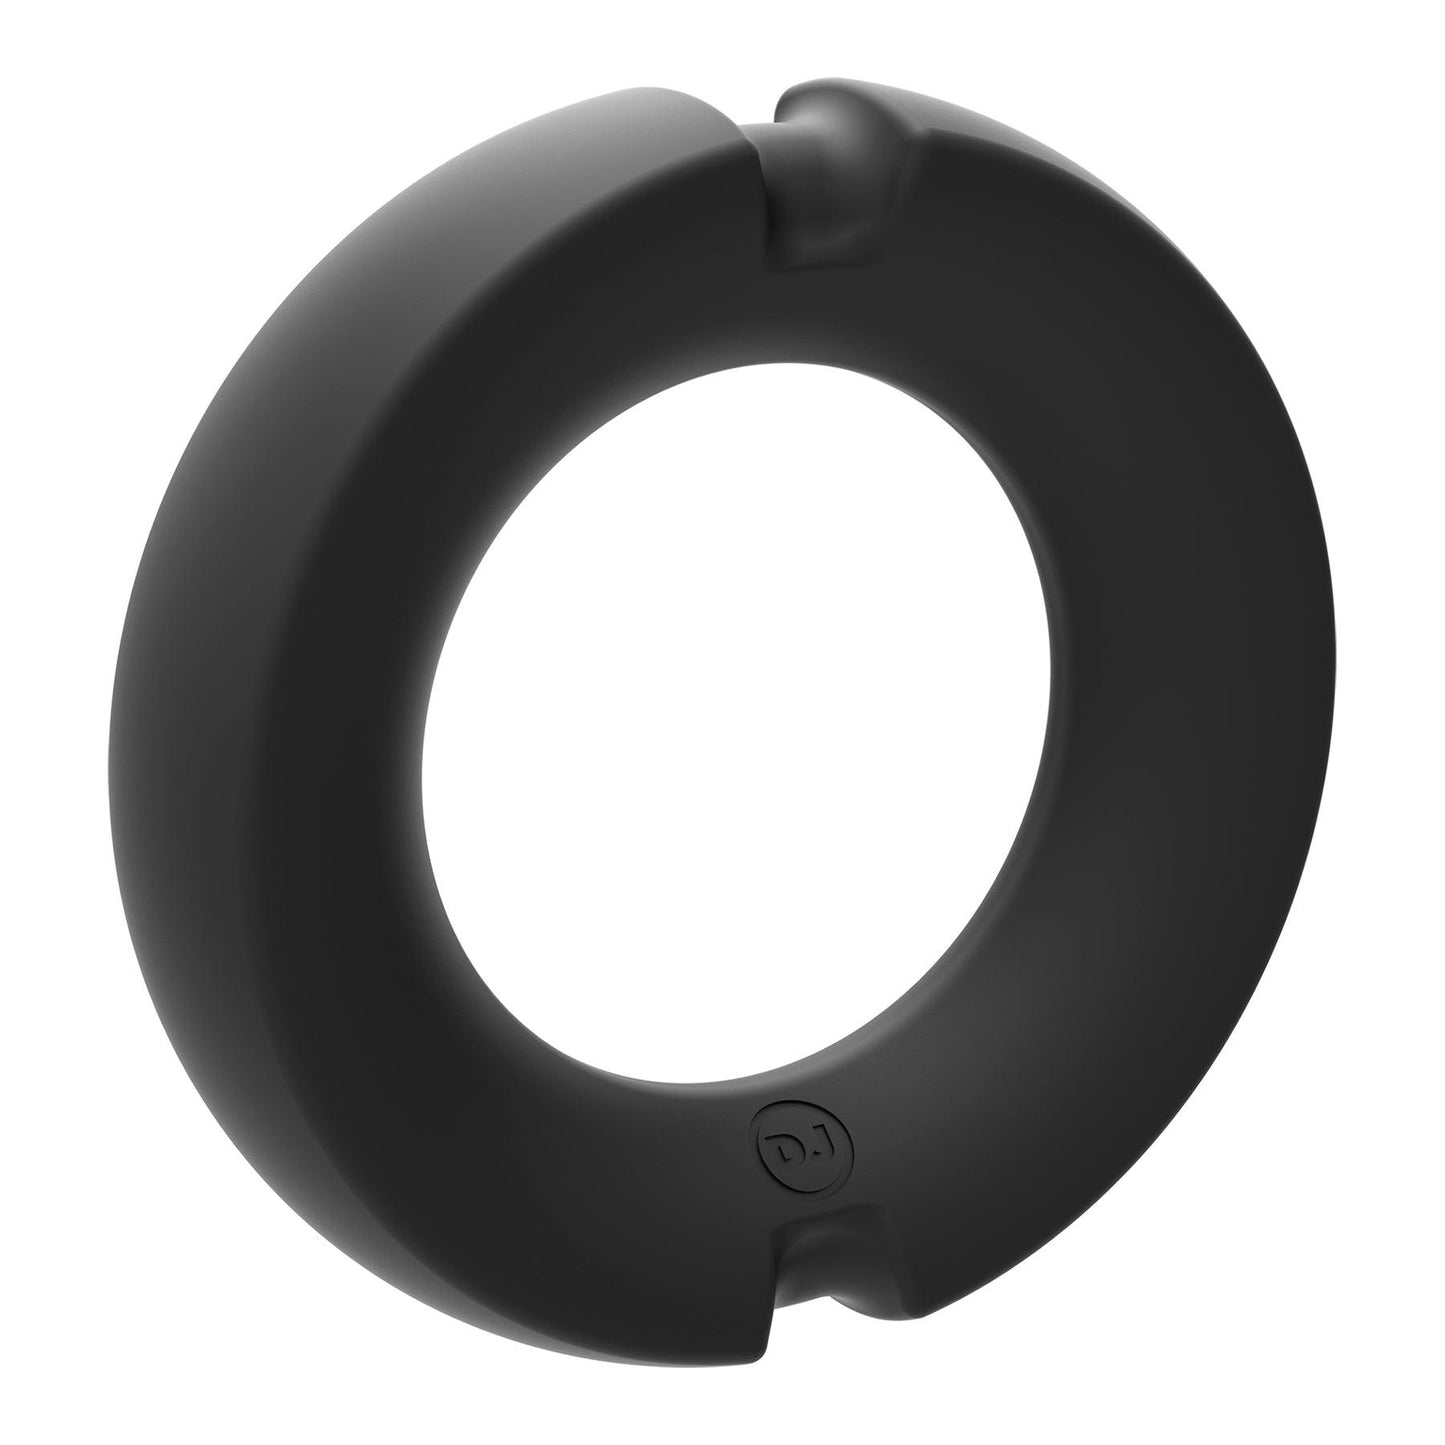 Merci - the Paradox - Silicone Covered Metal Cock Ring - 50mm - Black - My Sex Toy Hub